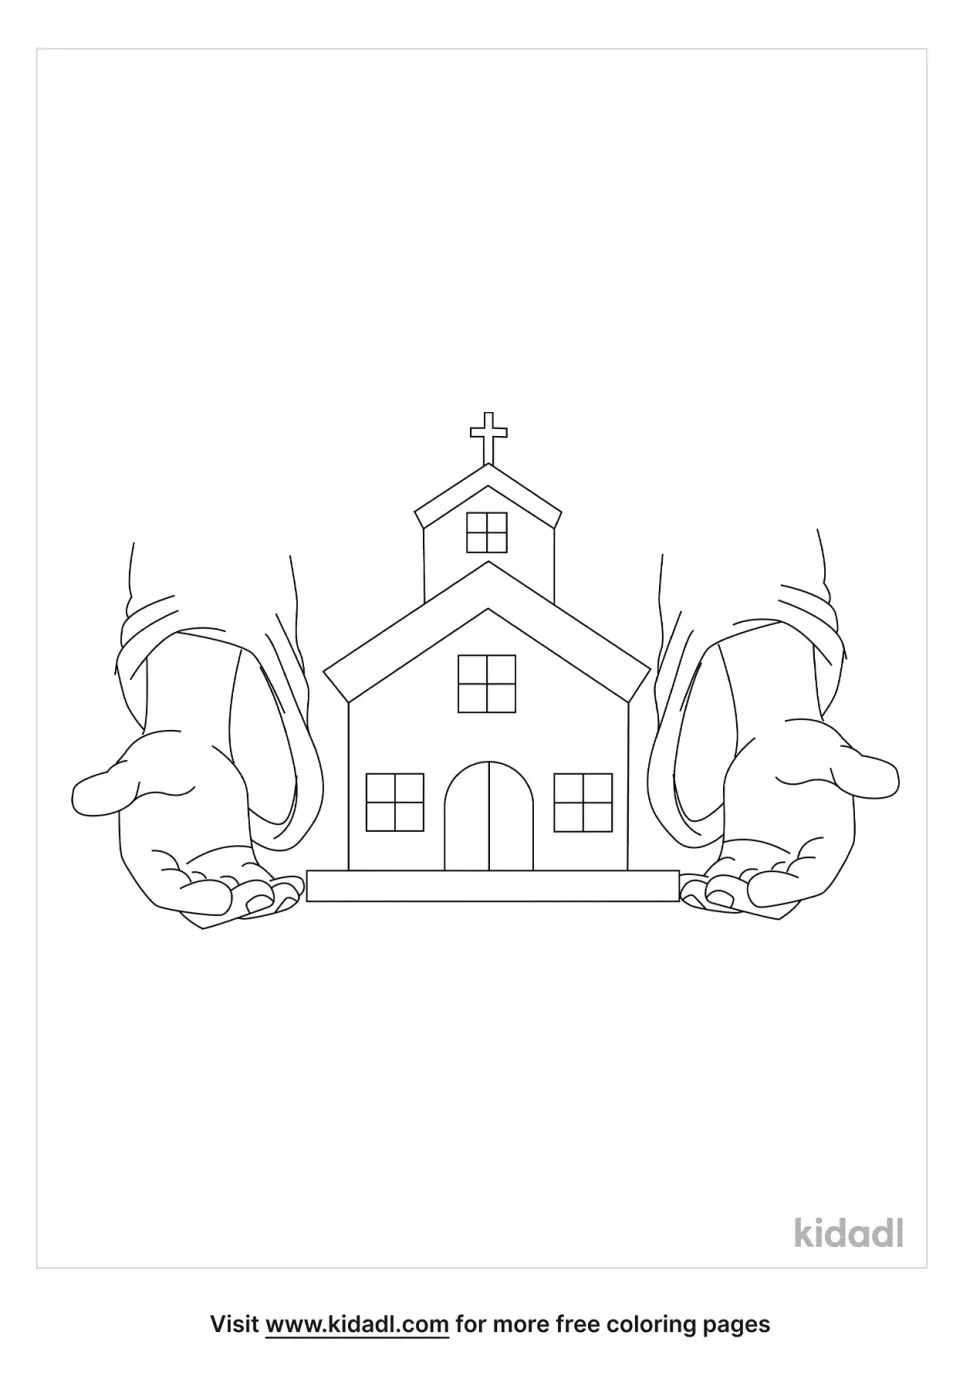 God's Hand Holding Church Coloring Page